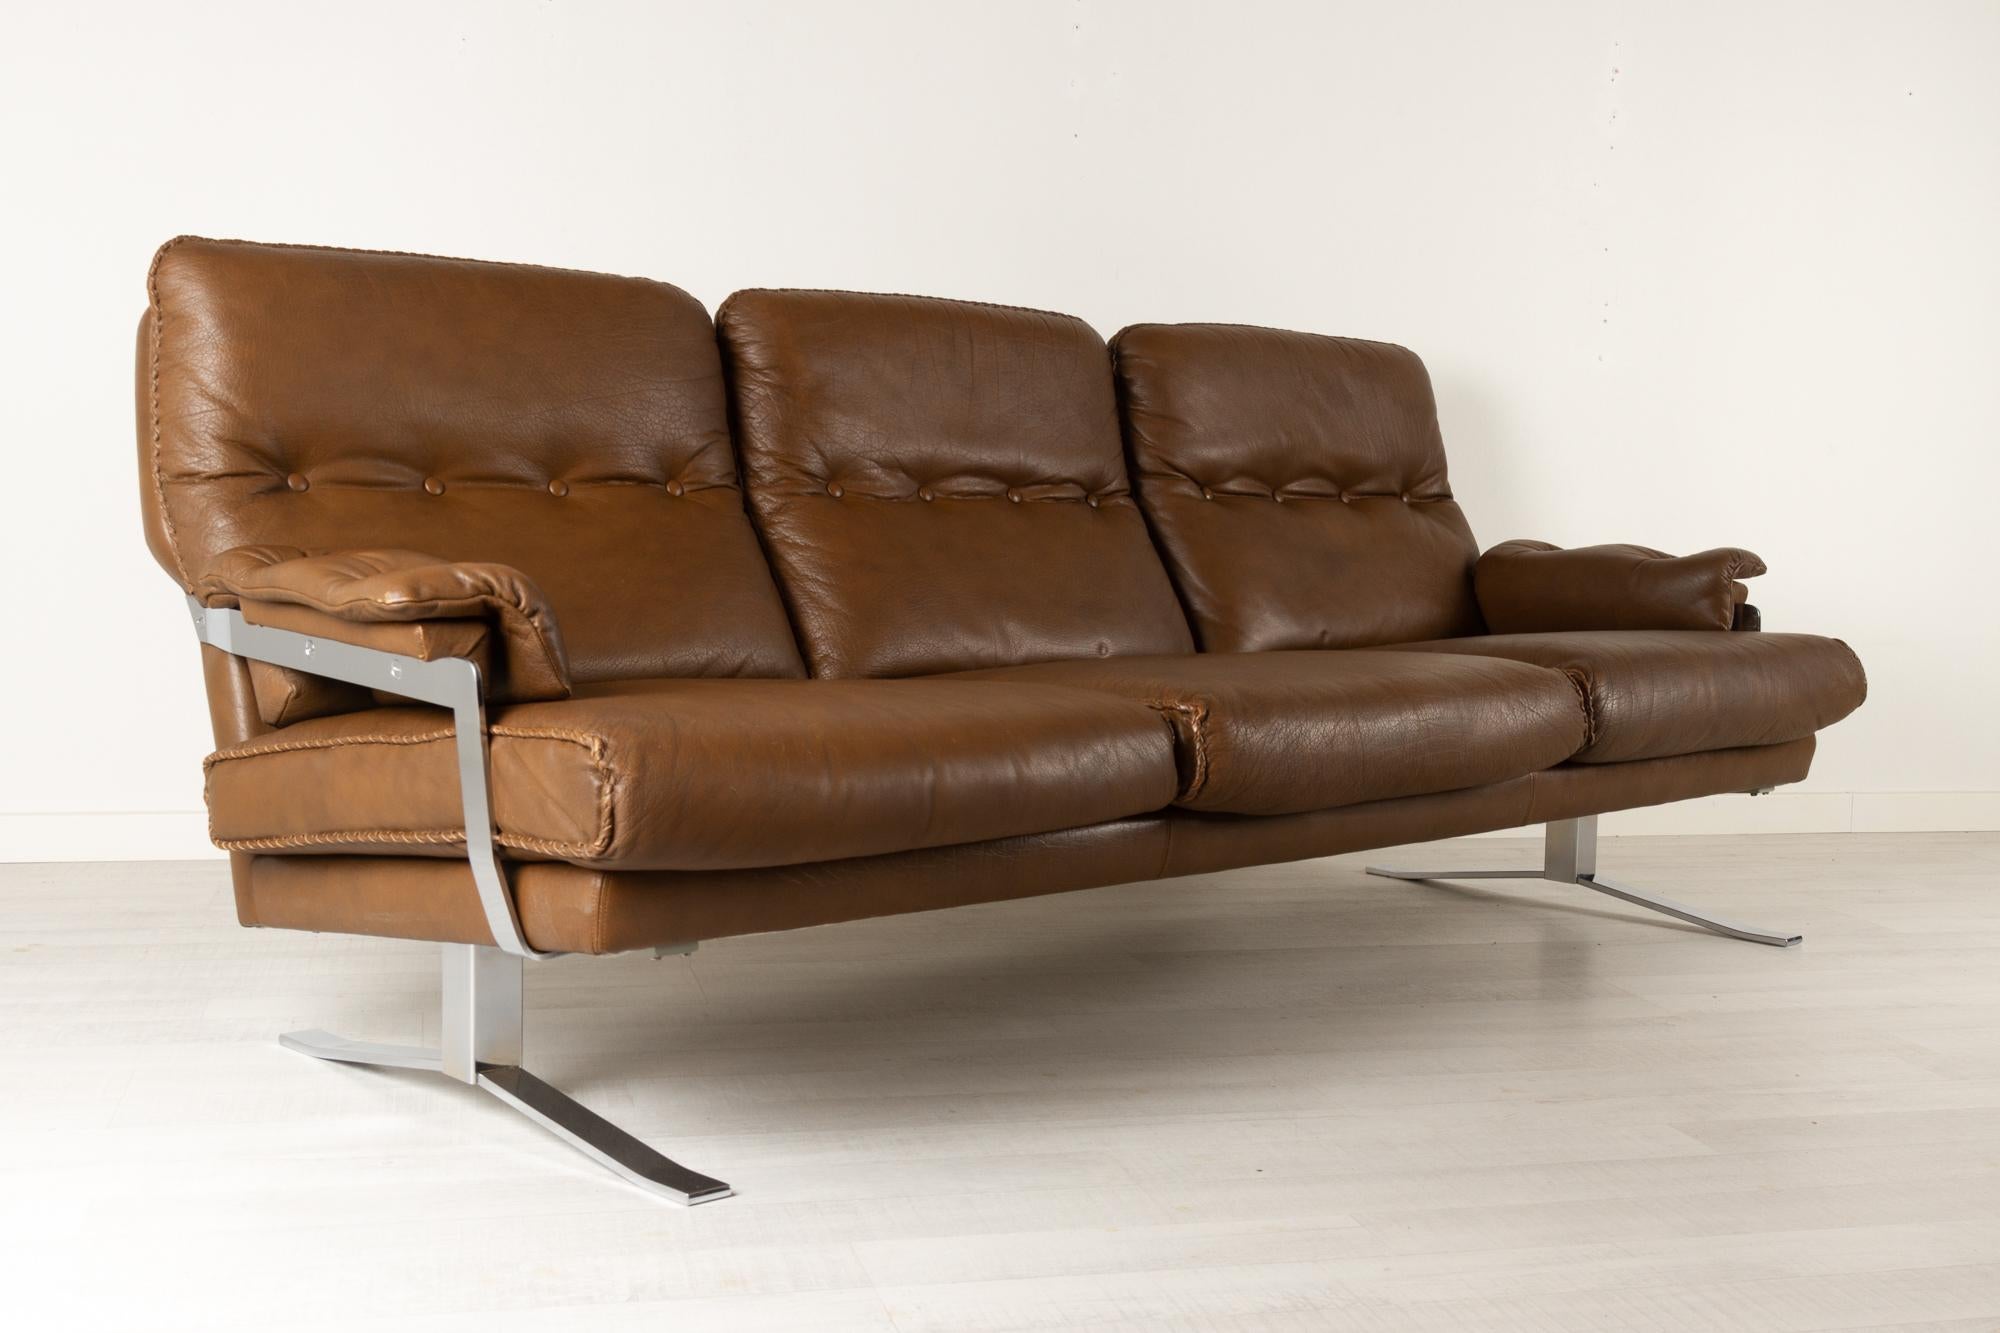 Scandinavian Modern leather and chrome sofa by Arne Norell, 1970s
Chocolate brown three seater sofa in buffalo leather. Large soft cushions with buttons and hand stitched edges. Very thick and soft leather. Legs and armrests in chromed